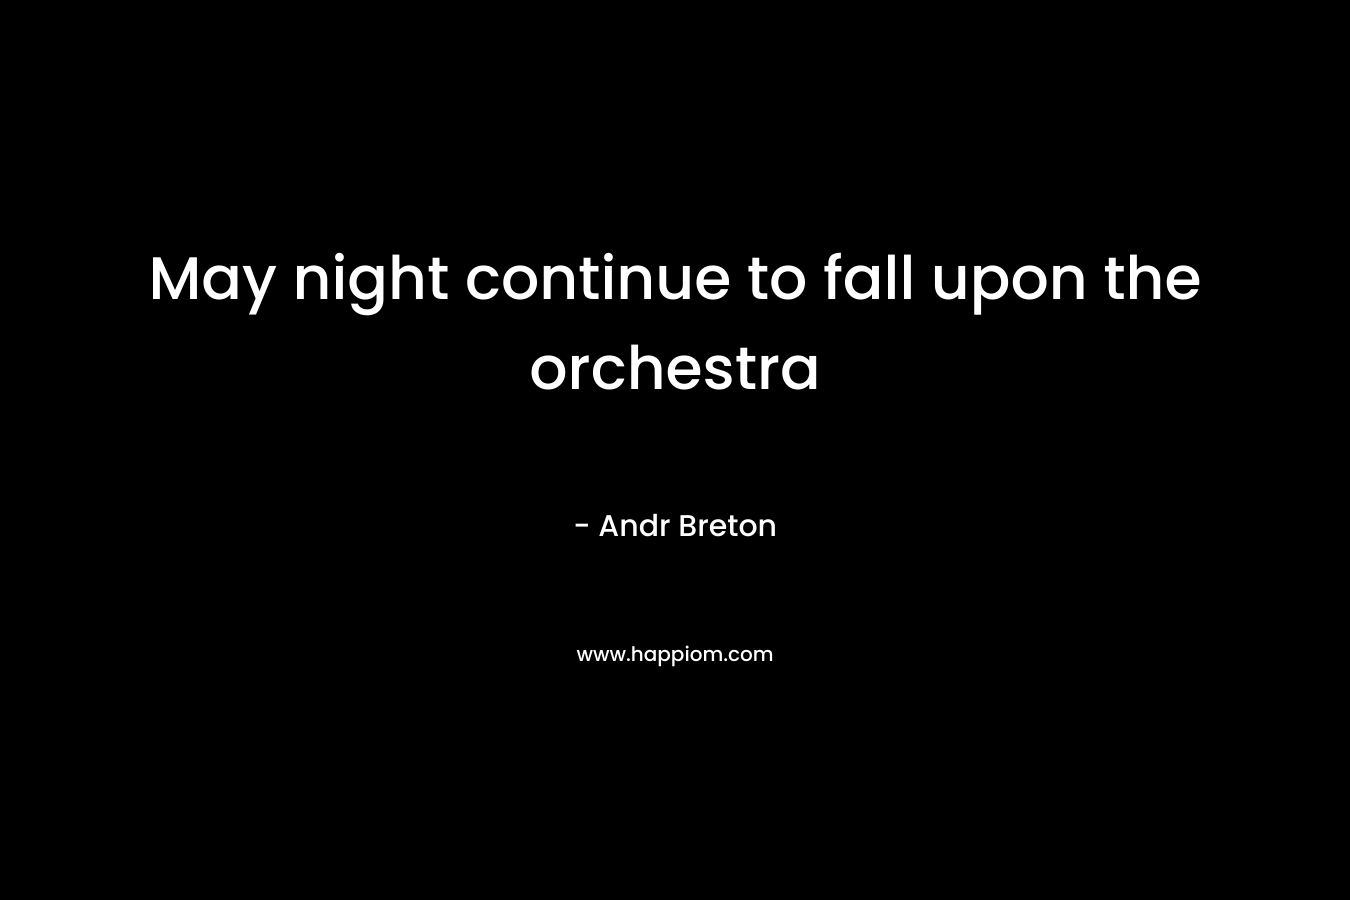 May night continue to fall upon the orchestra – Andr Breton